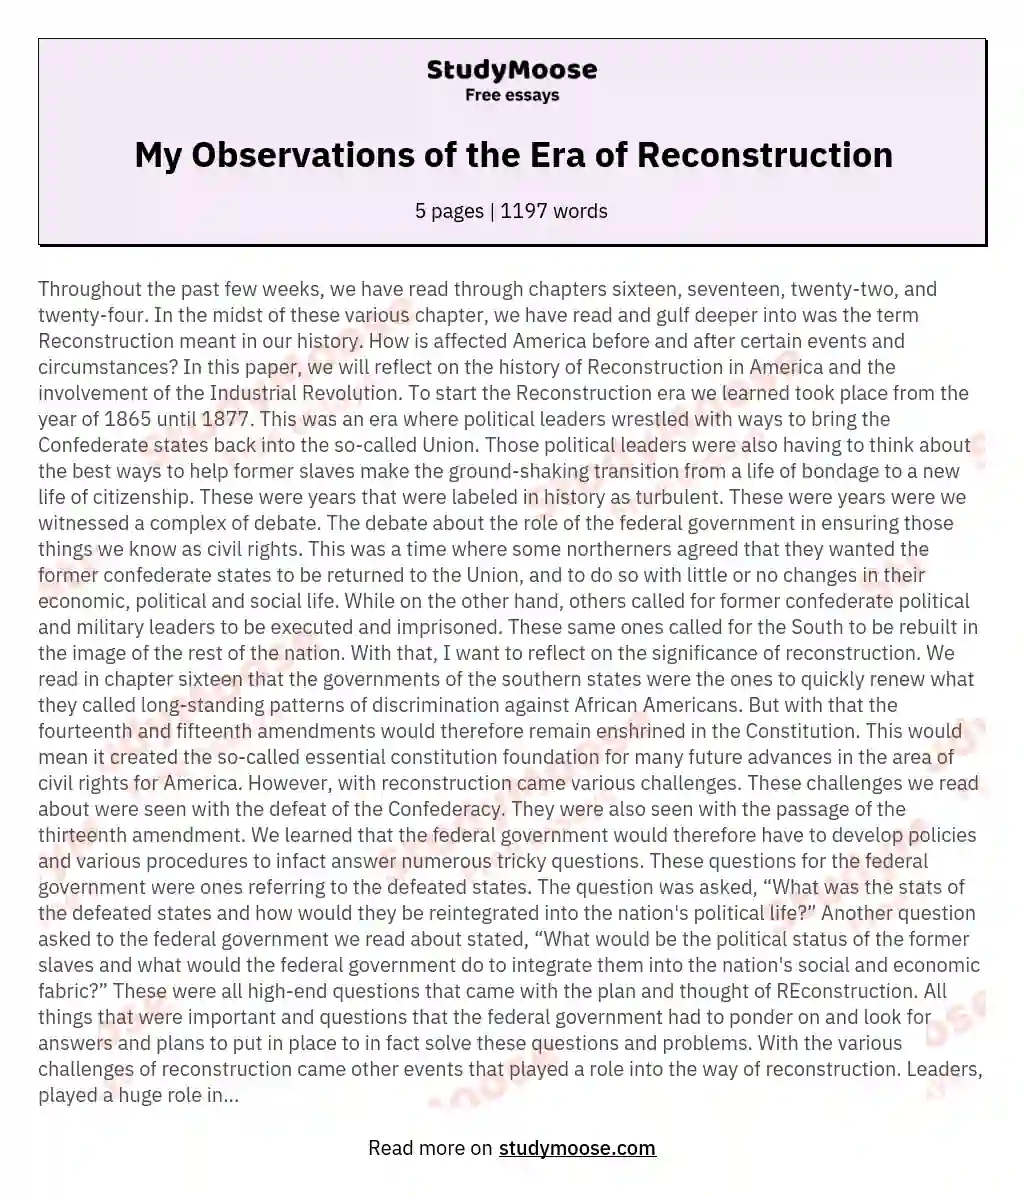 My Observations of the Era of Reconstruction essay